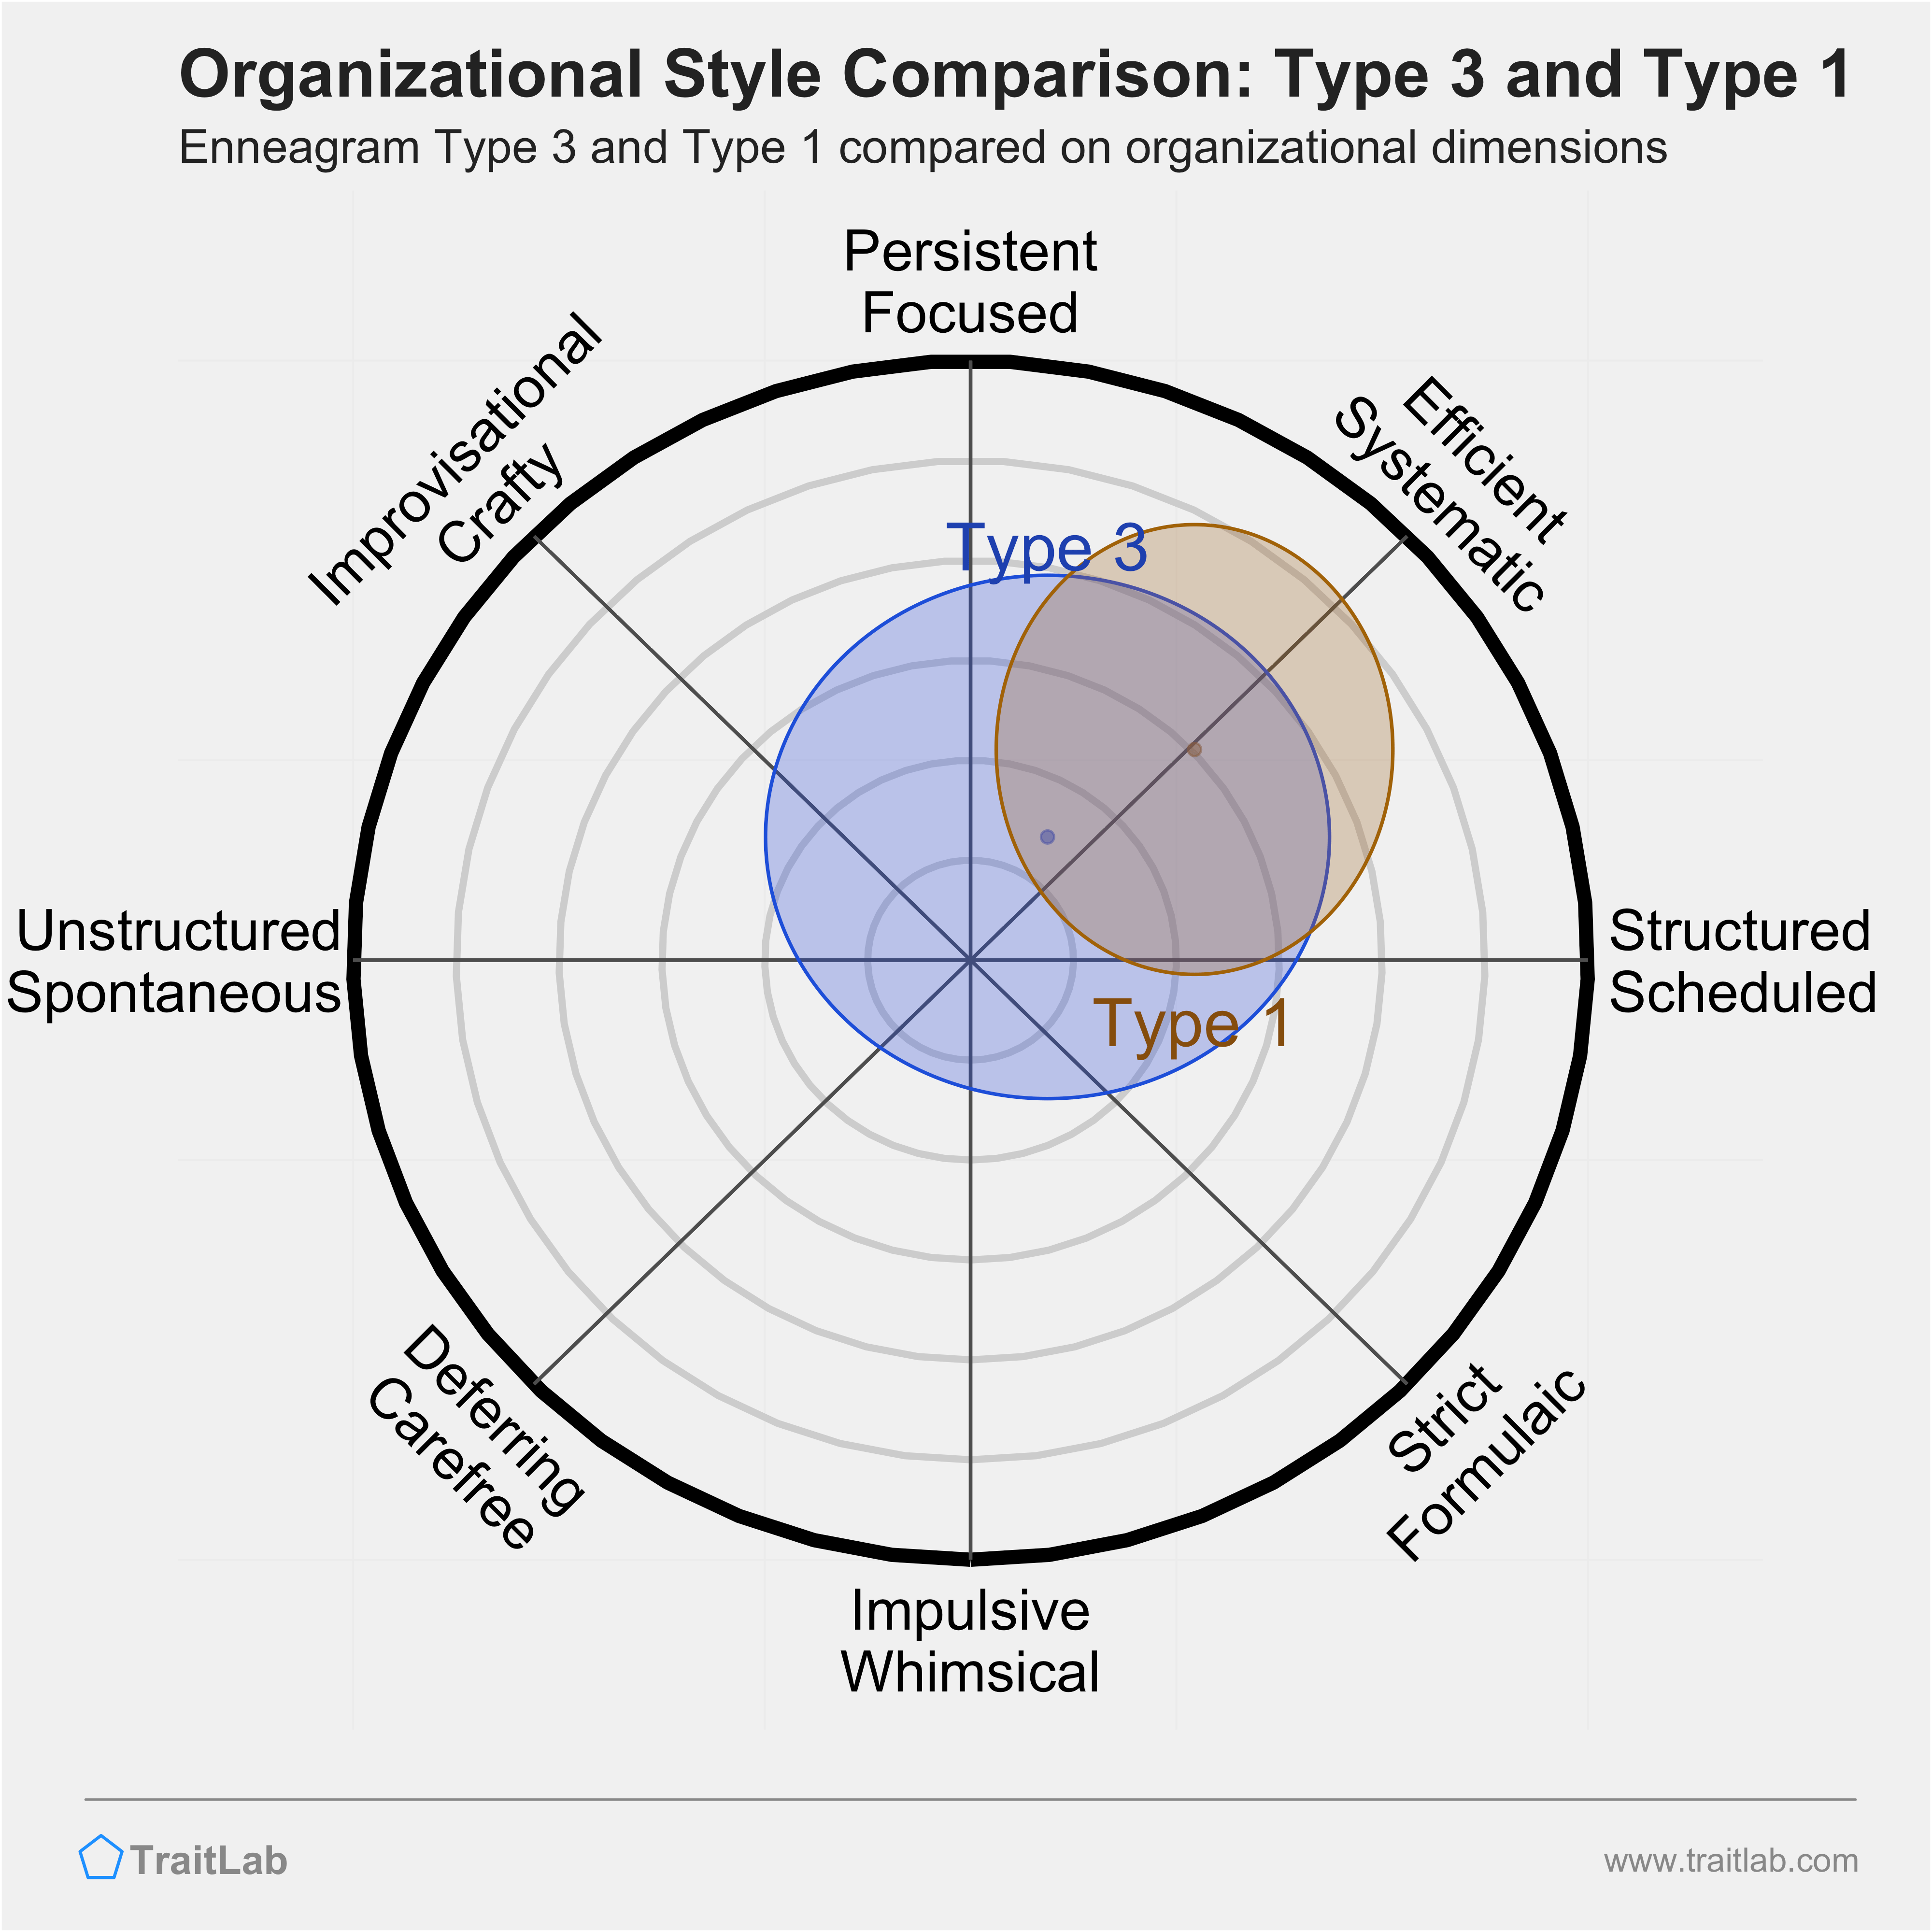 Type 3 and Type 1 comparison across organizational dimensions